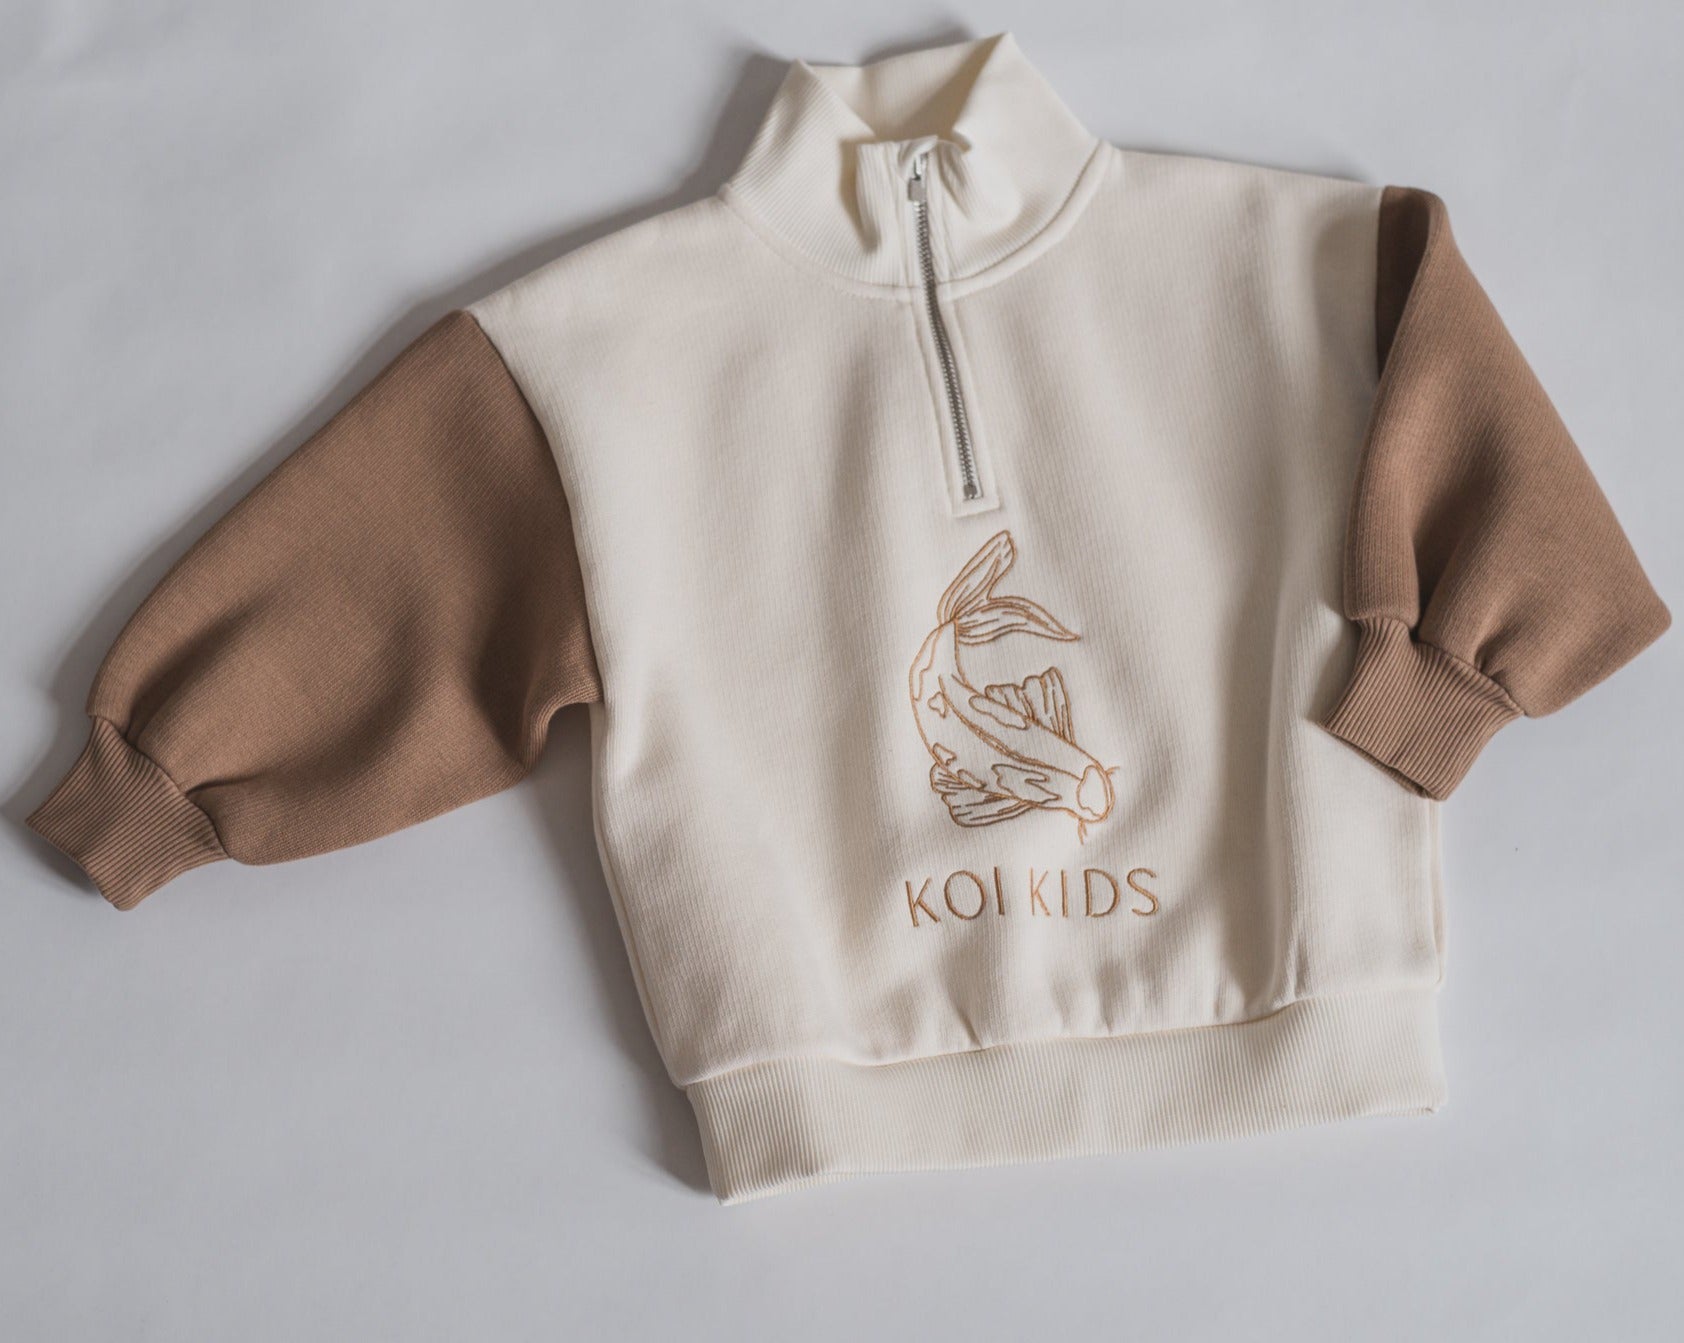 Offwhite sweatshirt with light brown Koi fish logo embroidery at front. With zipper neckline and brown contrast sleeves, foldable cuffs with an oversized fit.